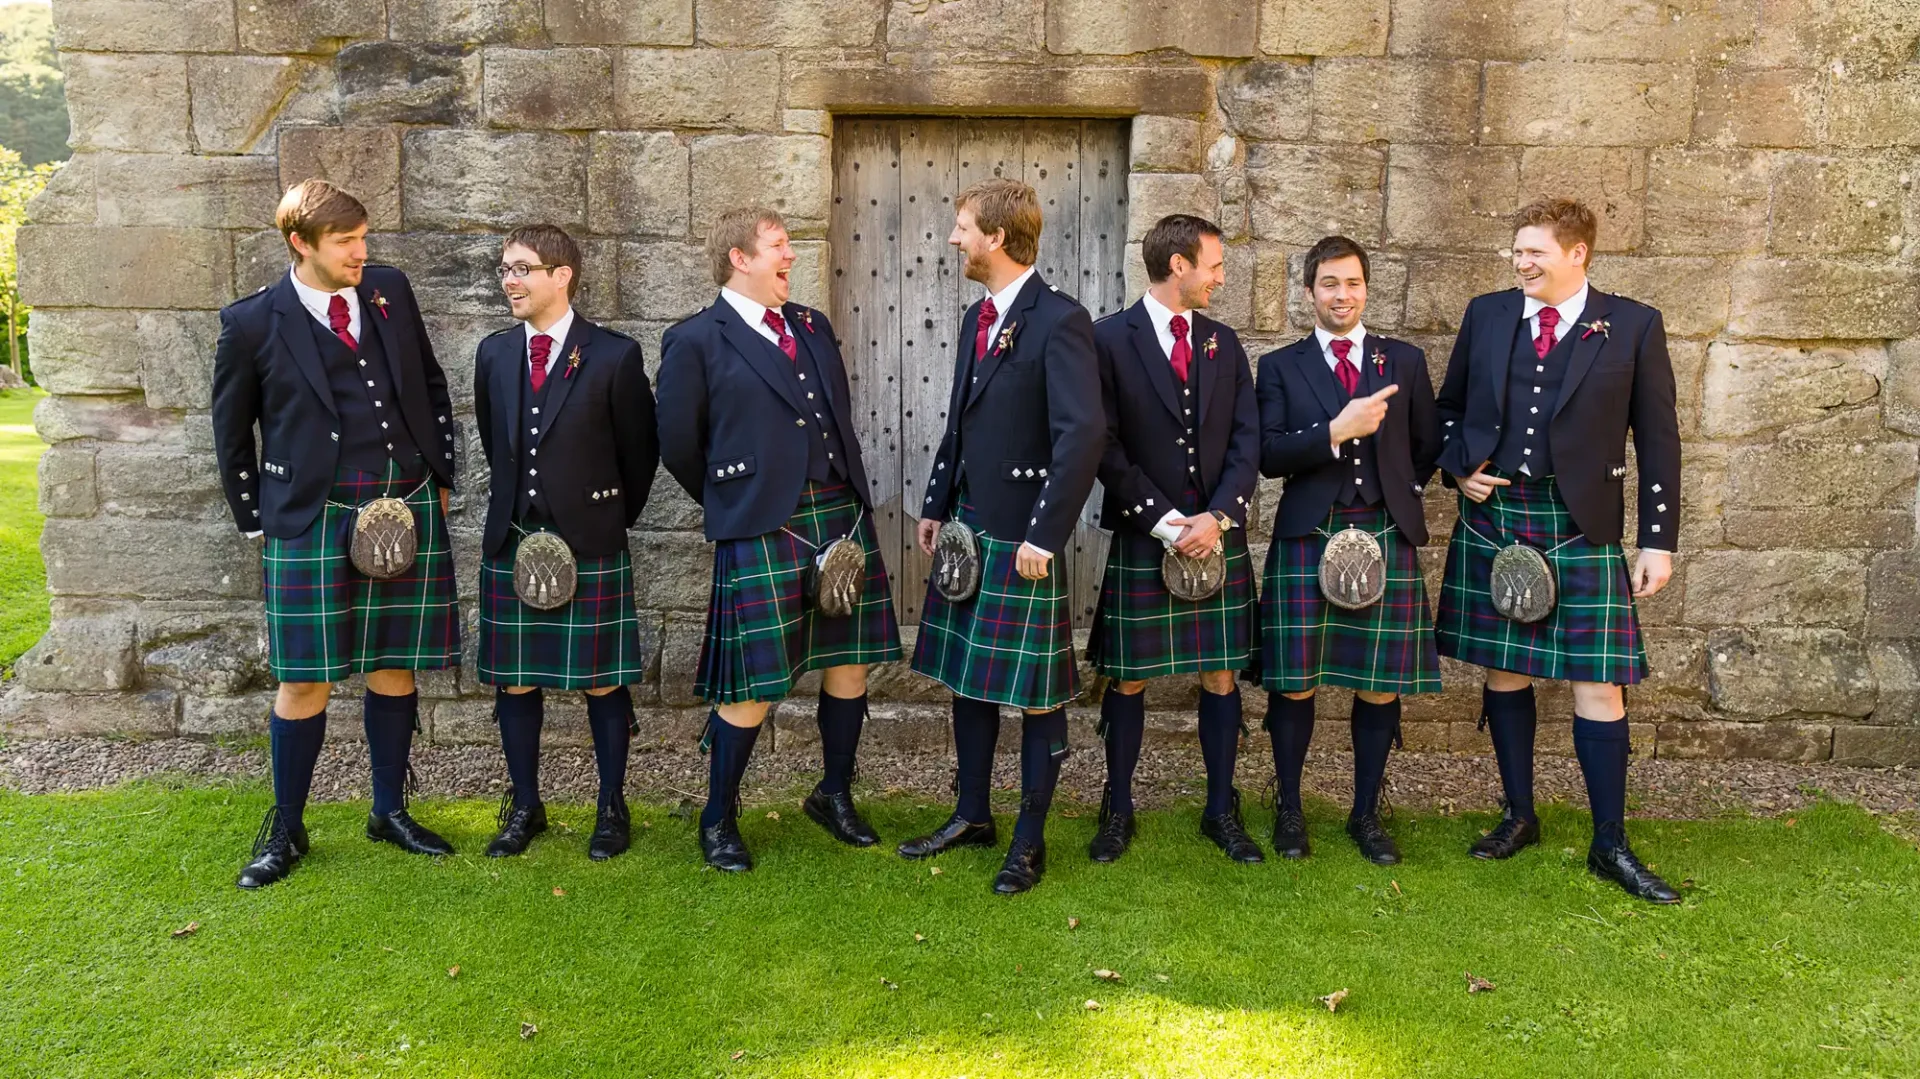 Group of seven men in matching dark blazers and tartan kilts, standing and laughing in front of an old stone building.